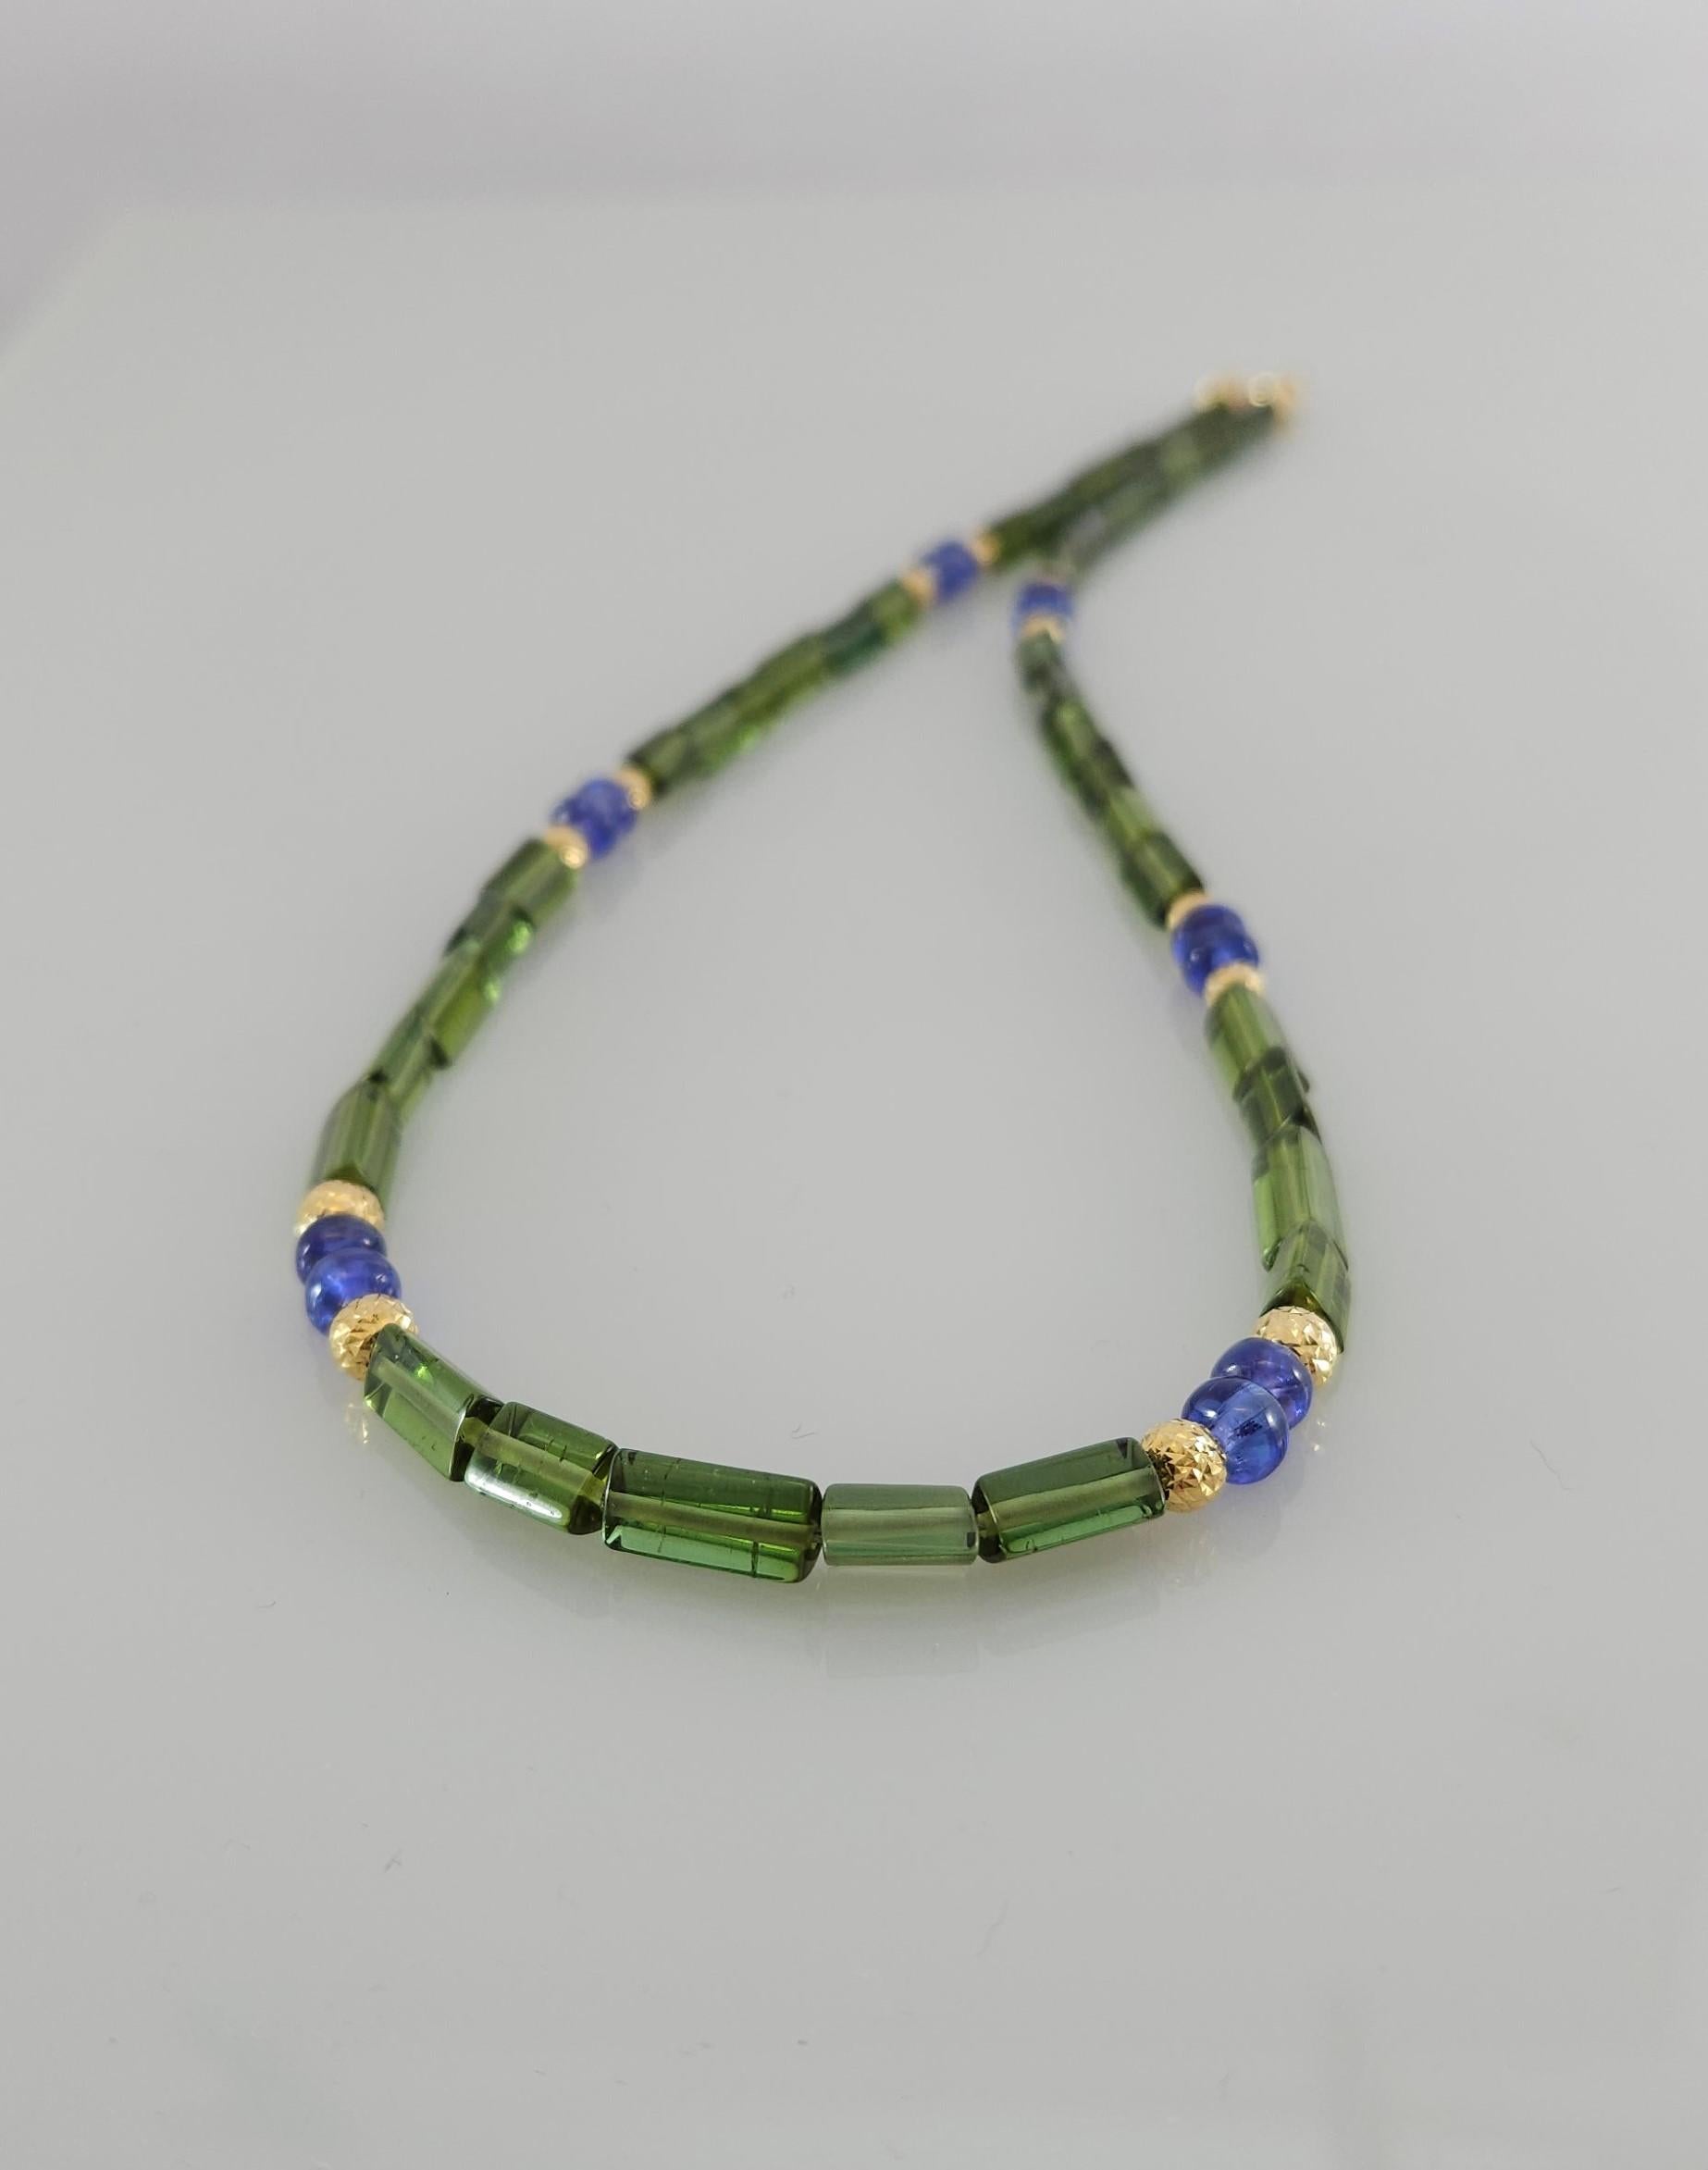 Green Tourmaline Crystal & Tanzanite Beaded Necklace with 18 Carat yellow Gold For Sale 6